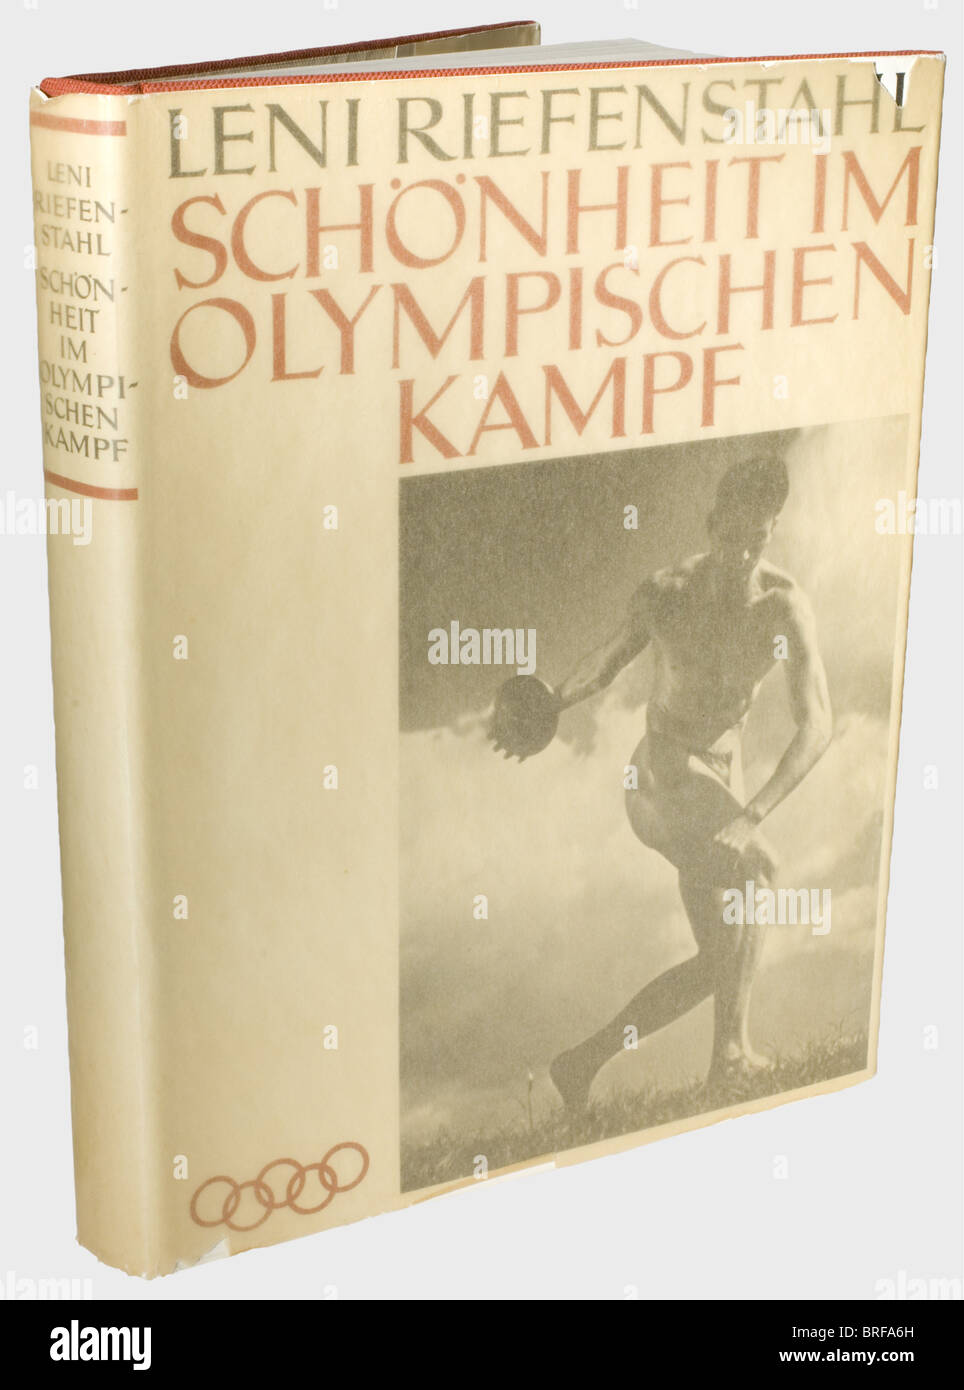 Leni Riefenstahl - Adolf Hitler., A copy of 'Schönheit im Olympischen Kampf' (Beauty in the Olympic Competition) from Hitler's library, with a personal dedication from Leni Riefenstahl. An ex libris Adolf Hitler's on the cover, and an ink dedication on the flyleaf, 'Meinem Führer in Dankbarkeit - Ihre glückliche Leni Riefenstahl' ('To My Führer with Gratitude - Your happy Leni Reifenstah). Red linen binding. Dust jacket and transparent cover. In original slipcase. historic, historical, people, 1930s, 20th century, NS, National Socialism, Nazism, Third Reich, Ge, Stock Photo